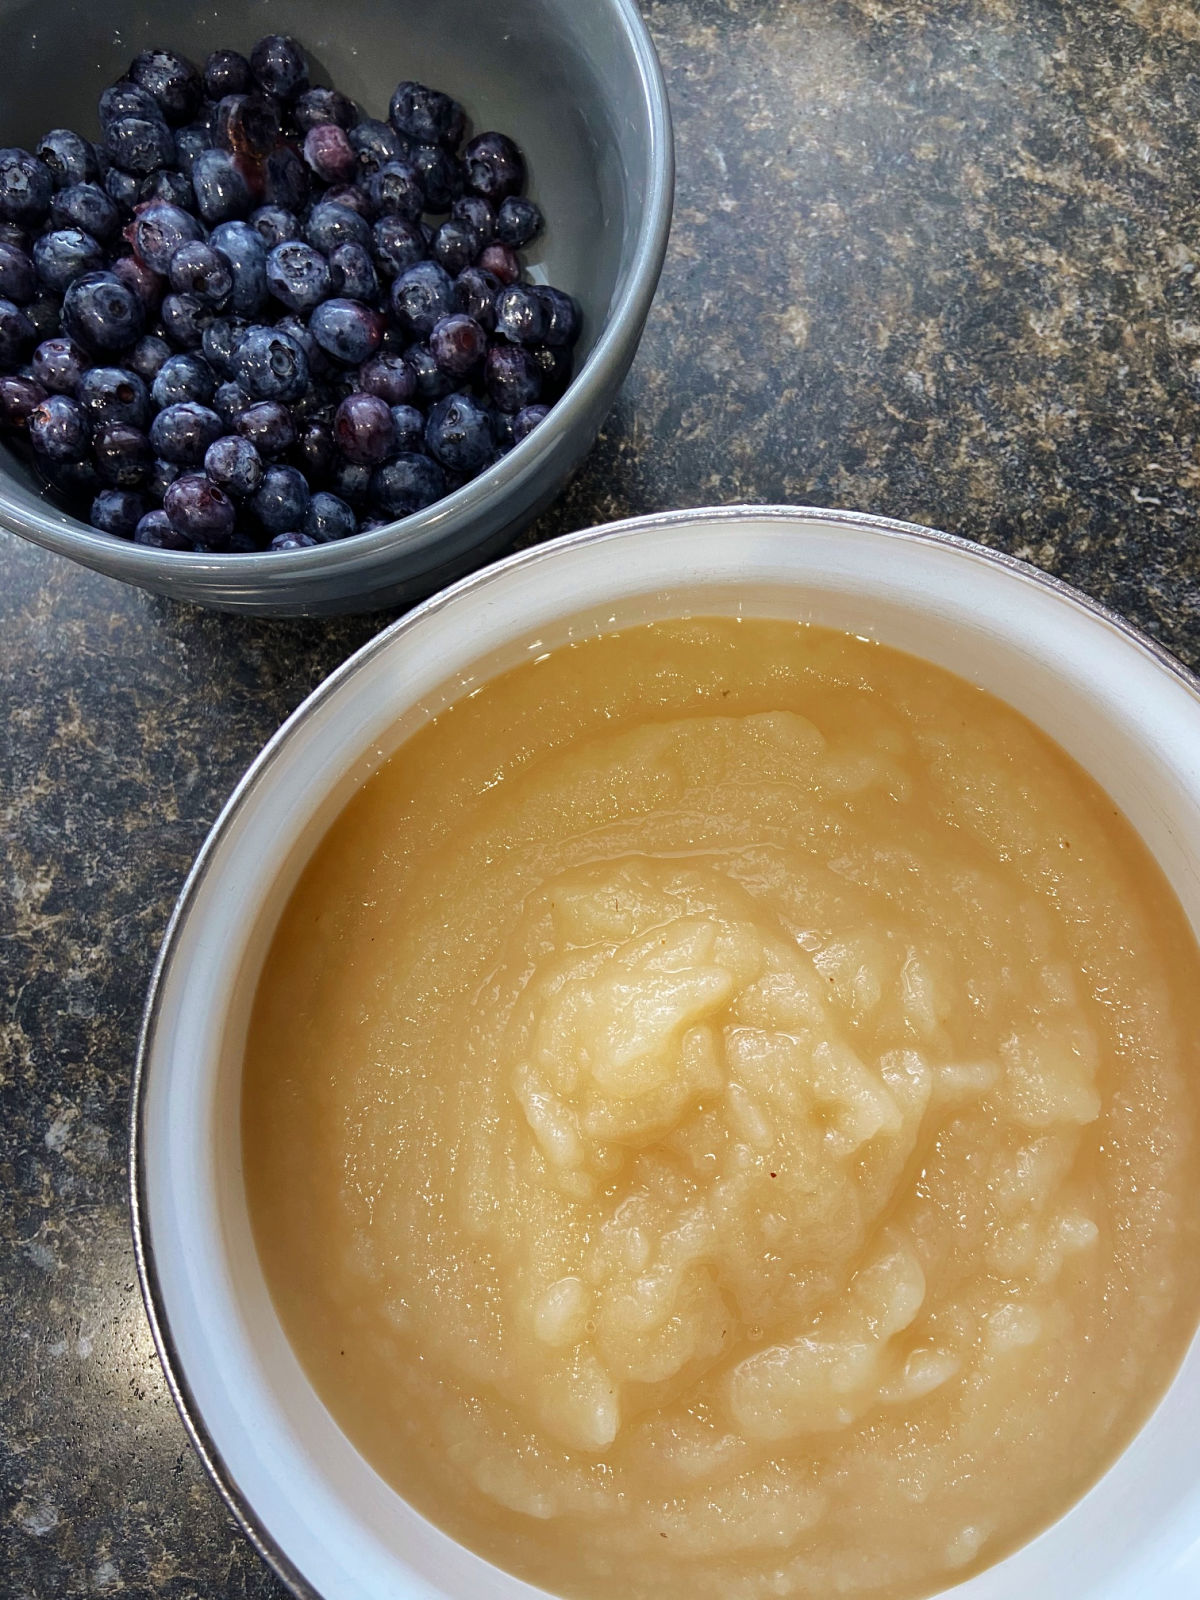 Applesauce in a pot and a bowl of blueberries.